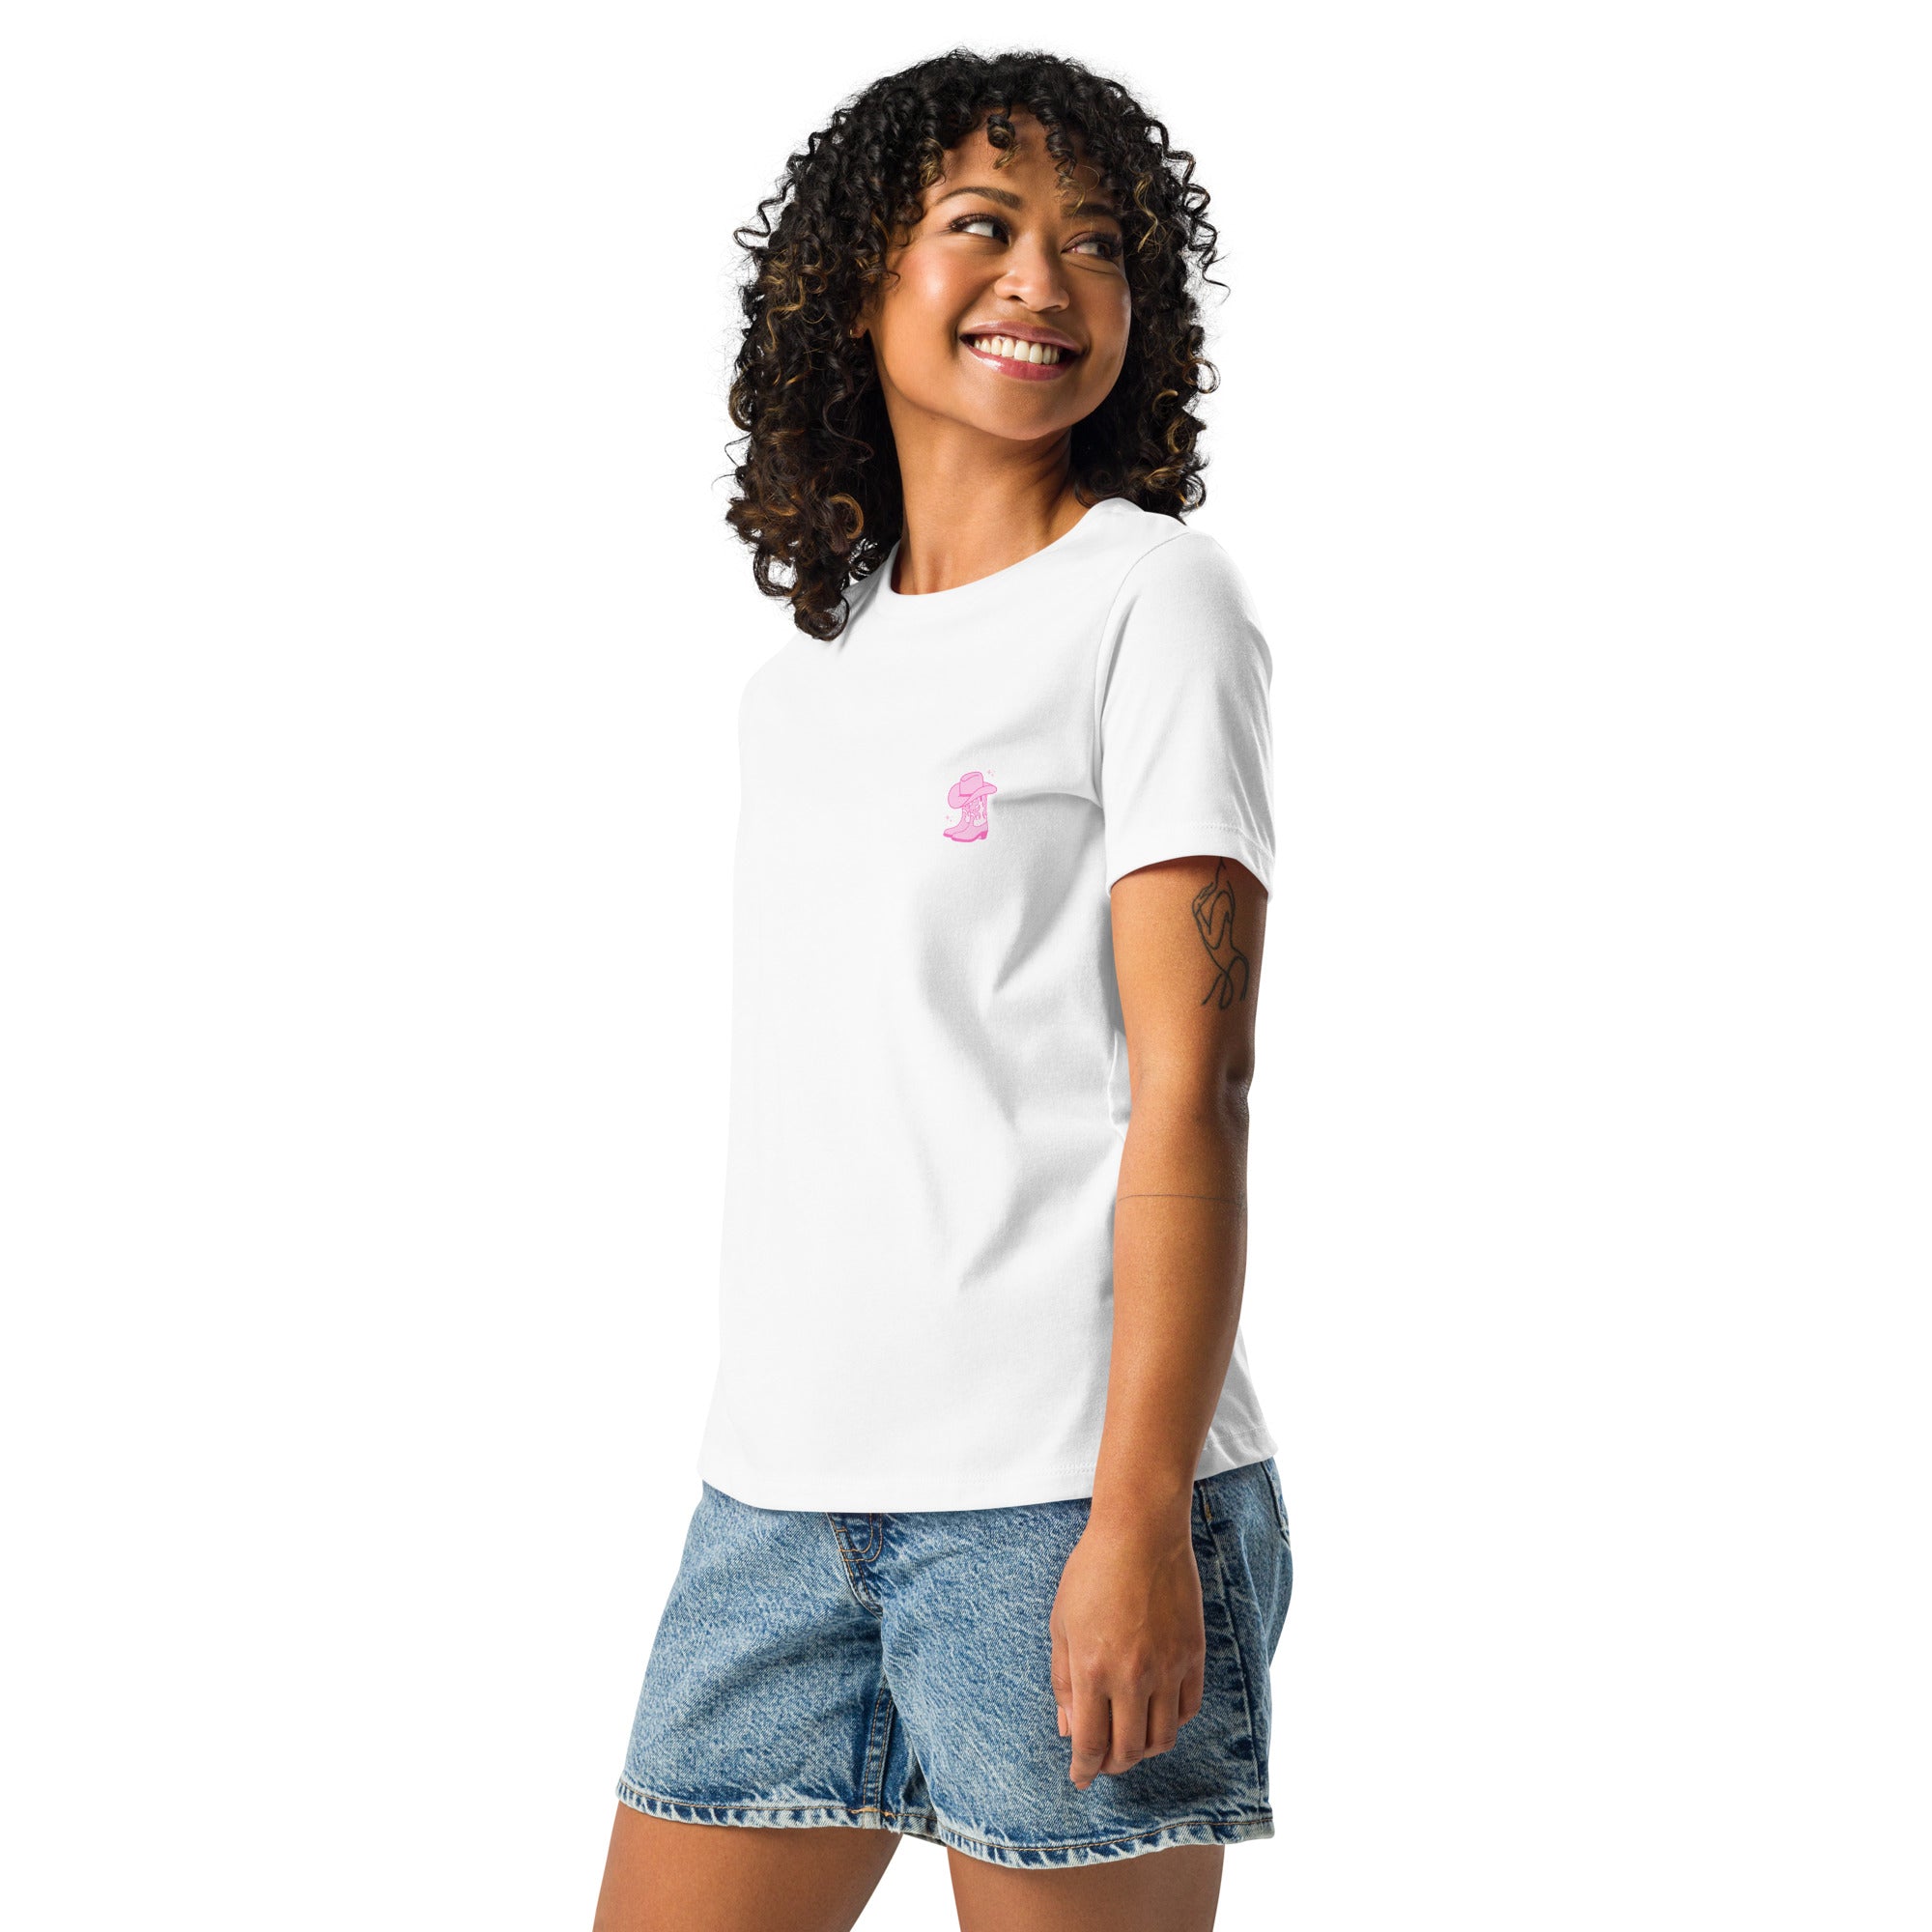 Other Cardio Women's Relaxed T-Shirt